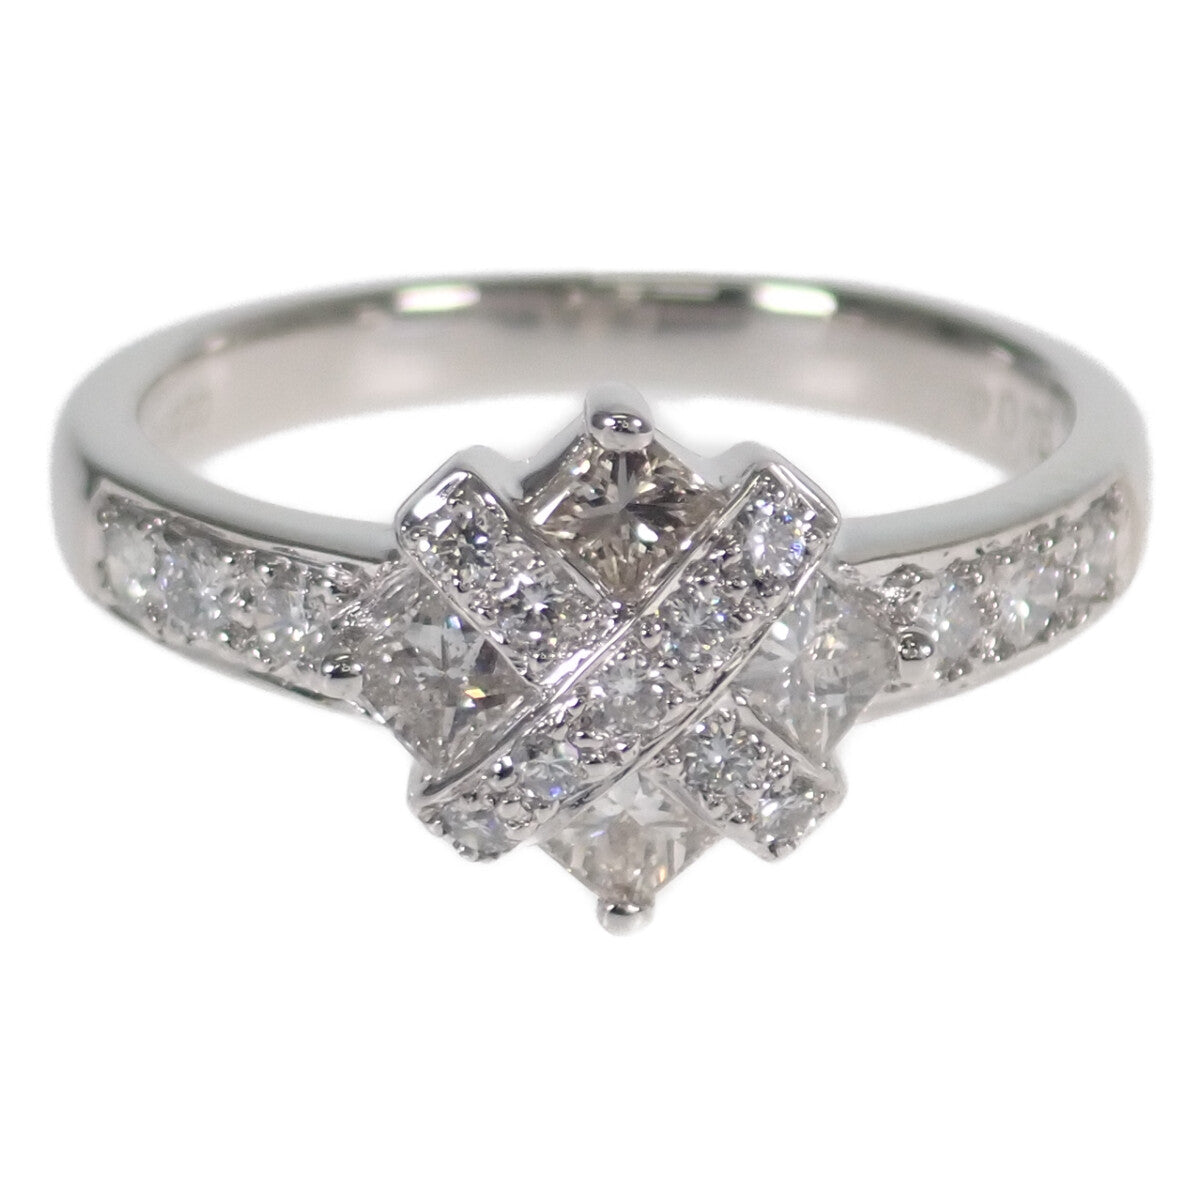 [LuxUness]  Ladies' Pt900 Platinum Design Diamond Ring (0.70ct) - Size 11, Silver Tone, Preowned in Excellent condition